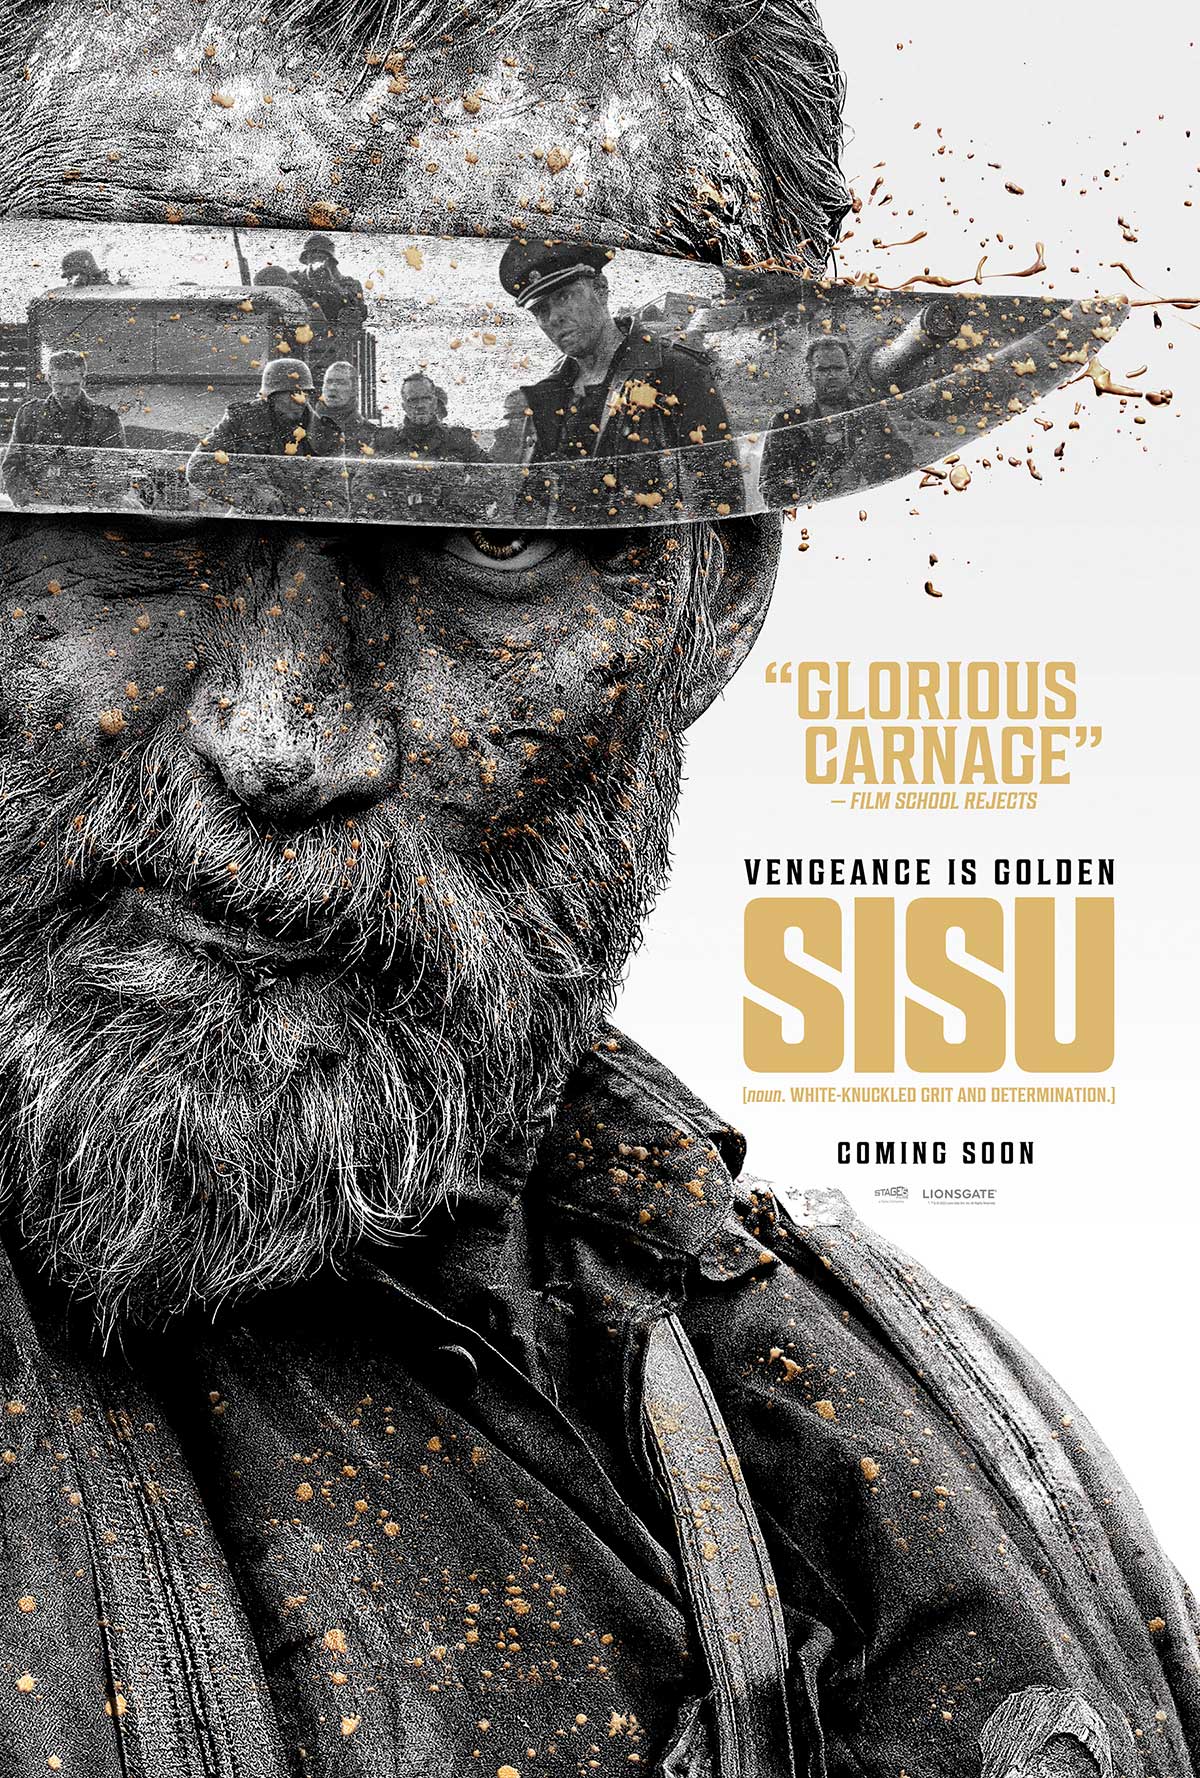 Sisu has just arrived in US cinemas, but tomorrow you can watch it at